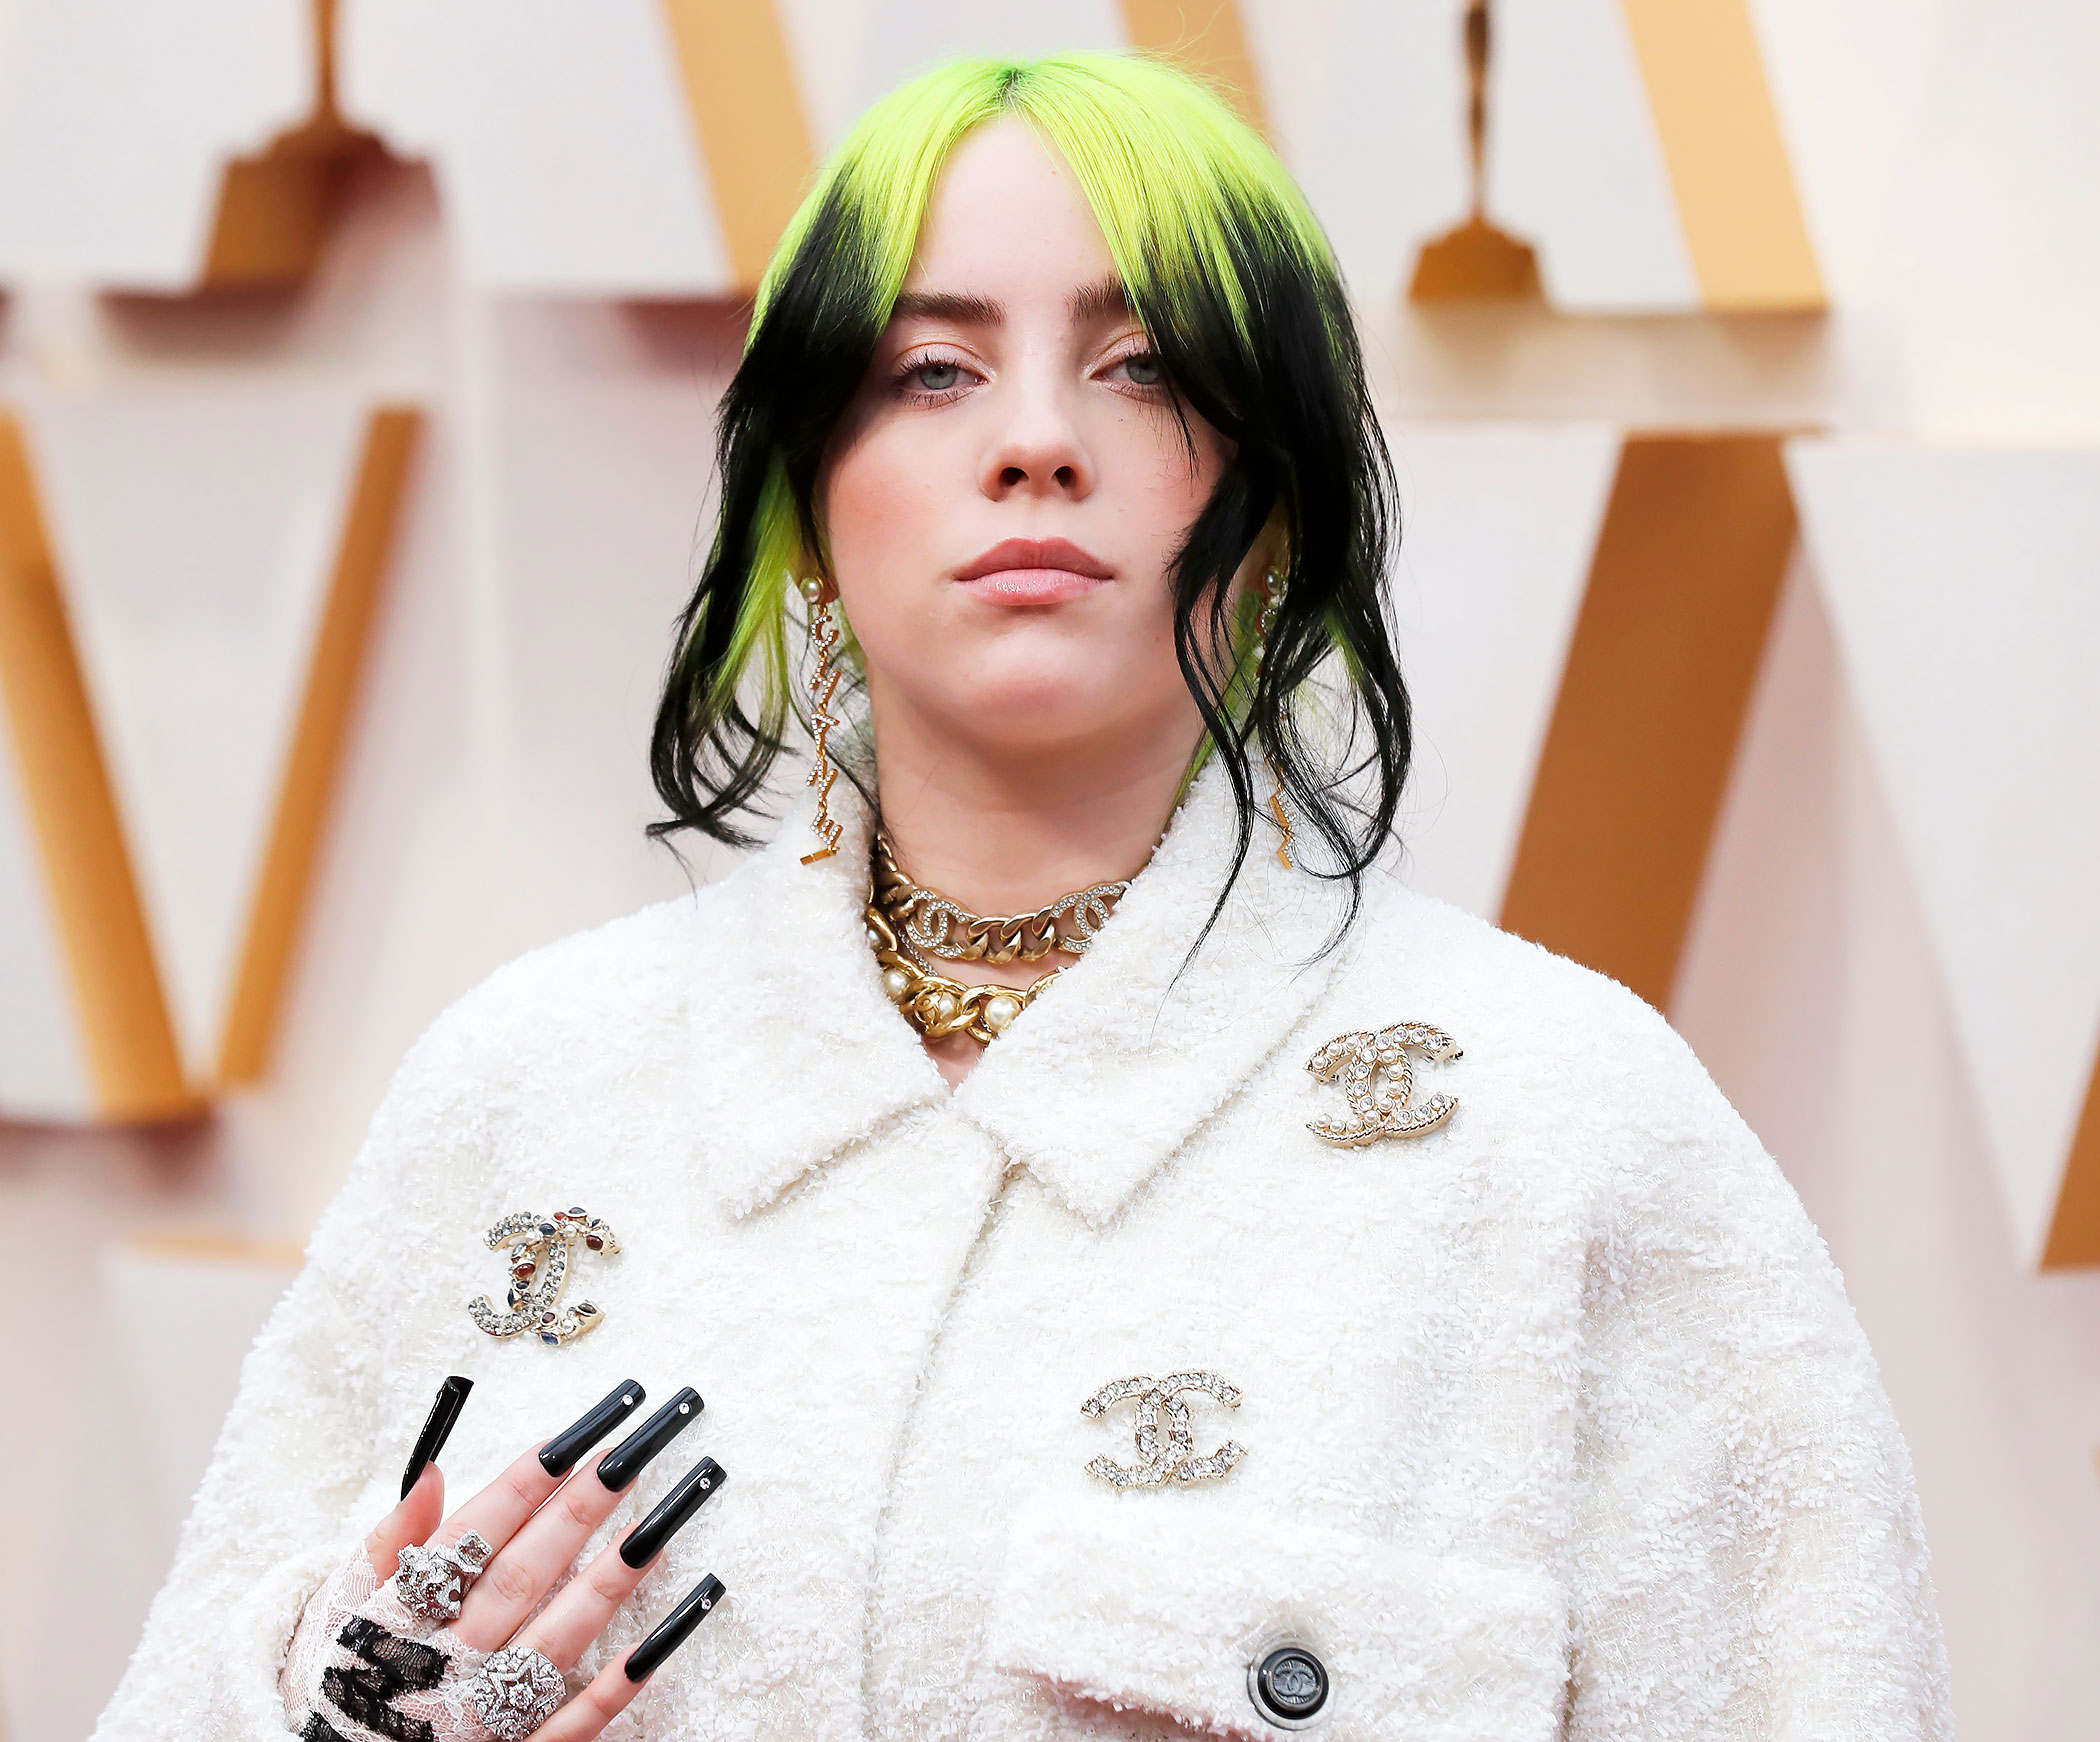 Billie Eilish's jewelry at the 2019 AMAs Archives – Who Wore What Jewels